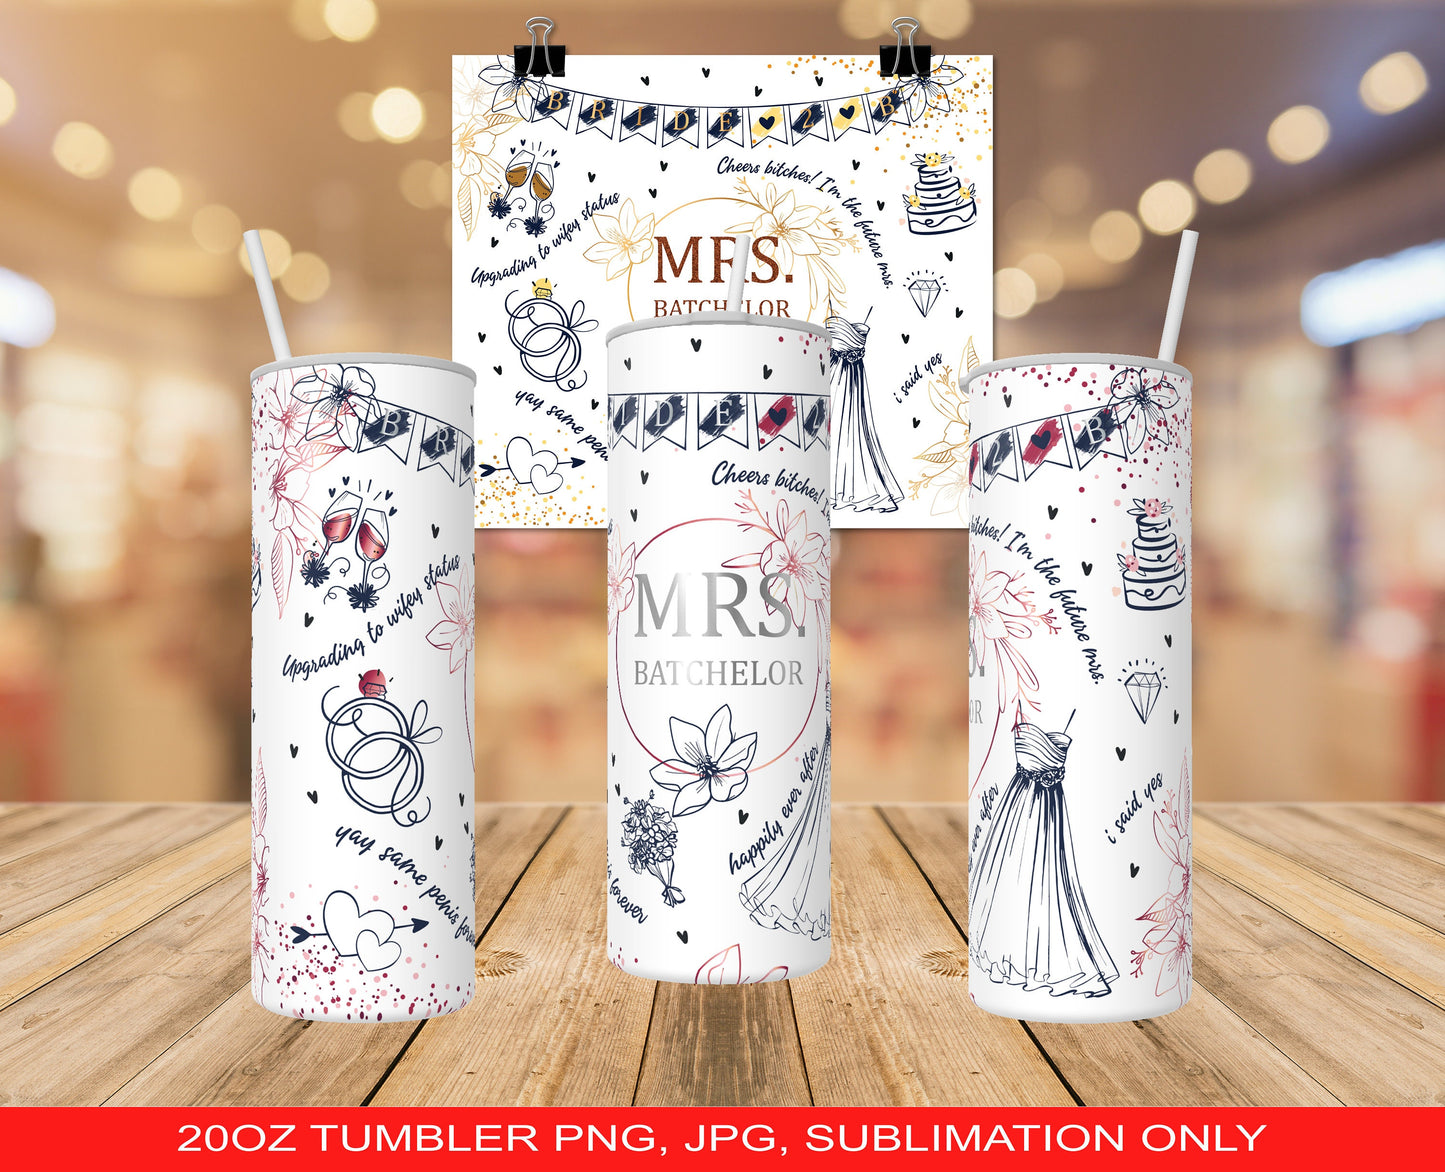 Personalized Mrs. Bachelor 20oz Tumbler PNG and JPG ONLY